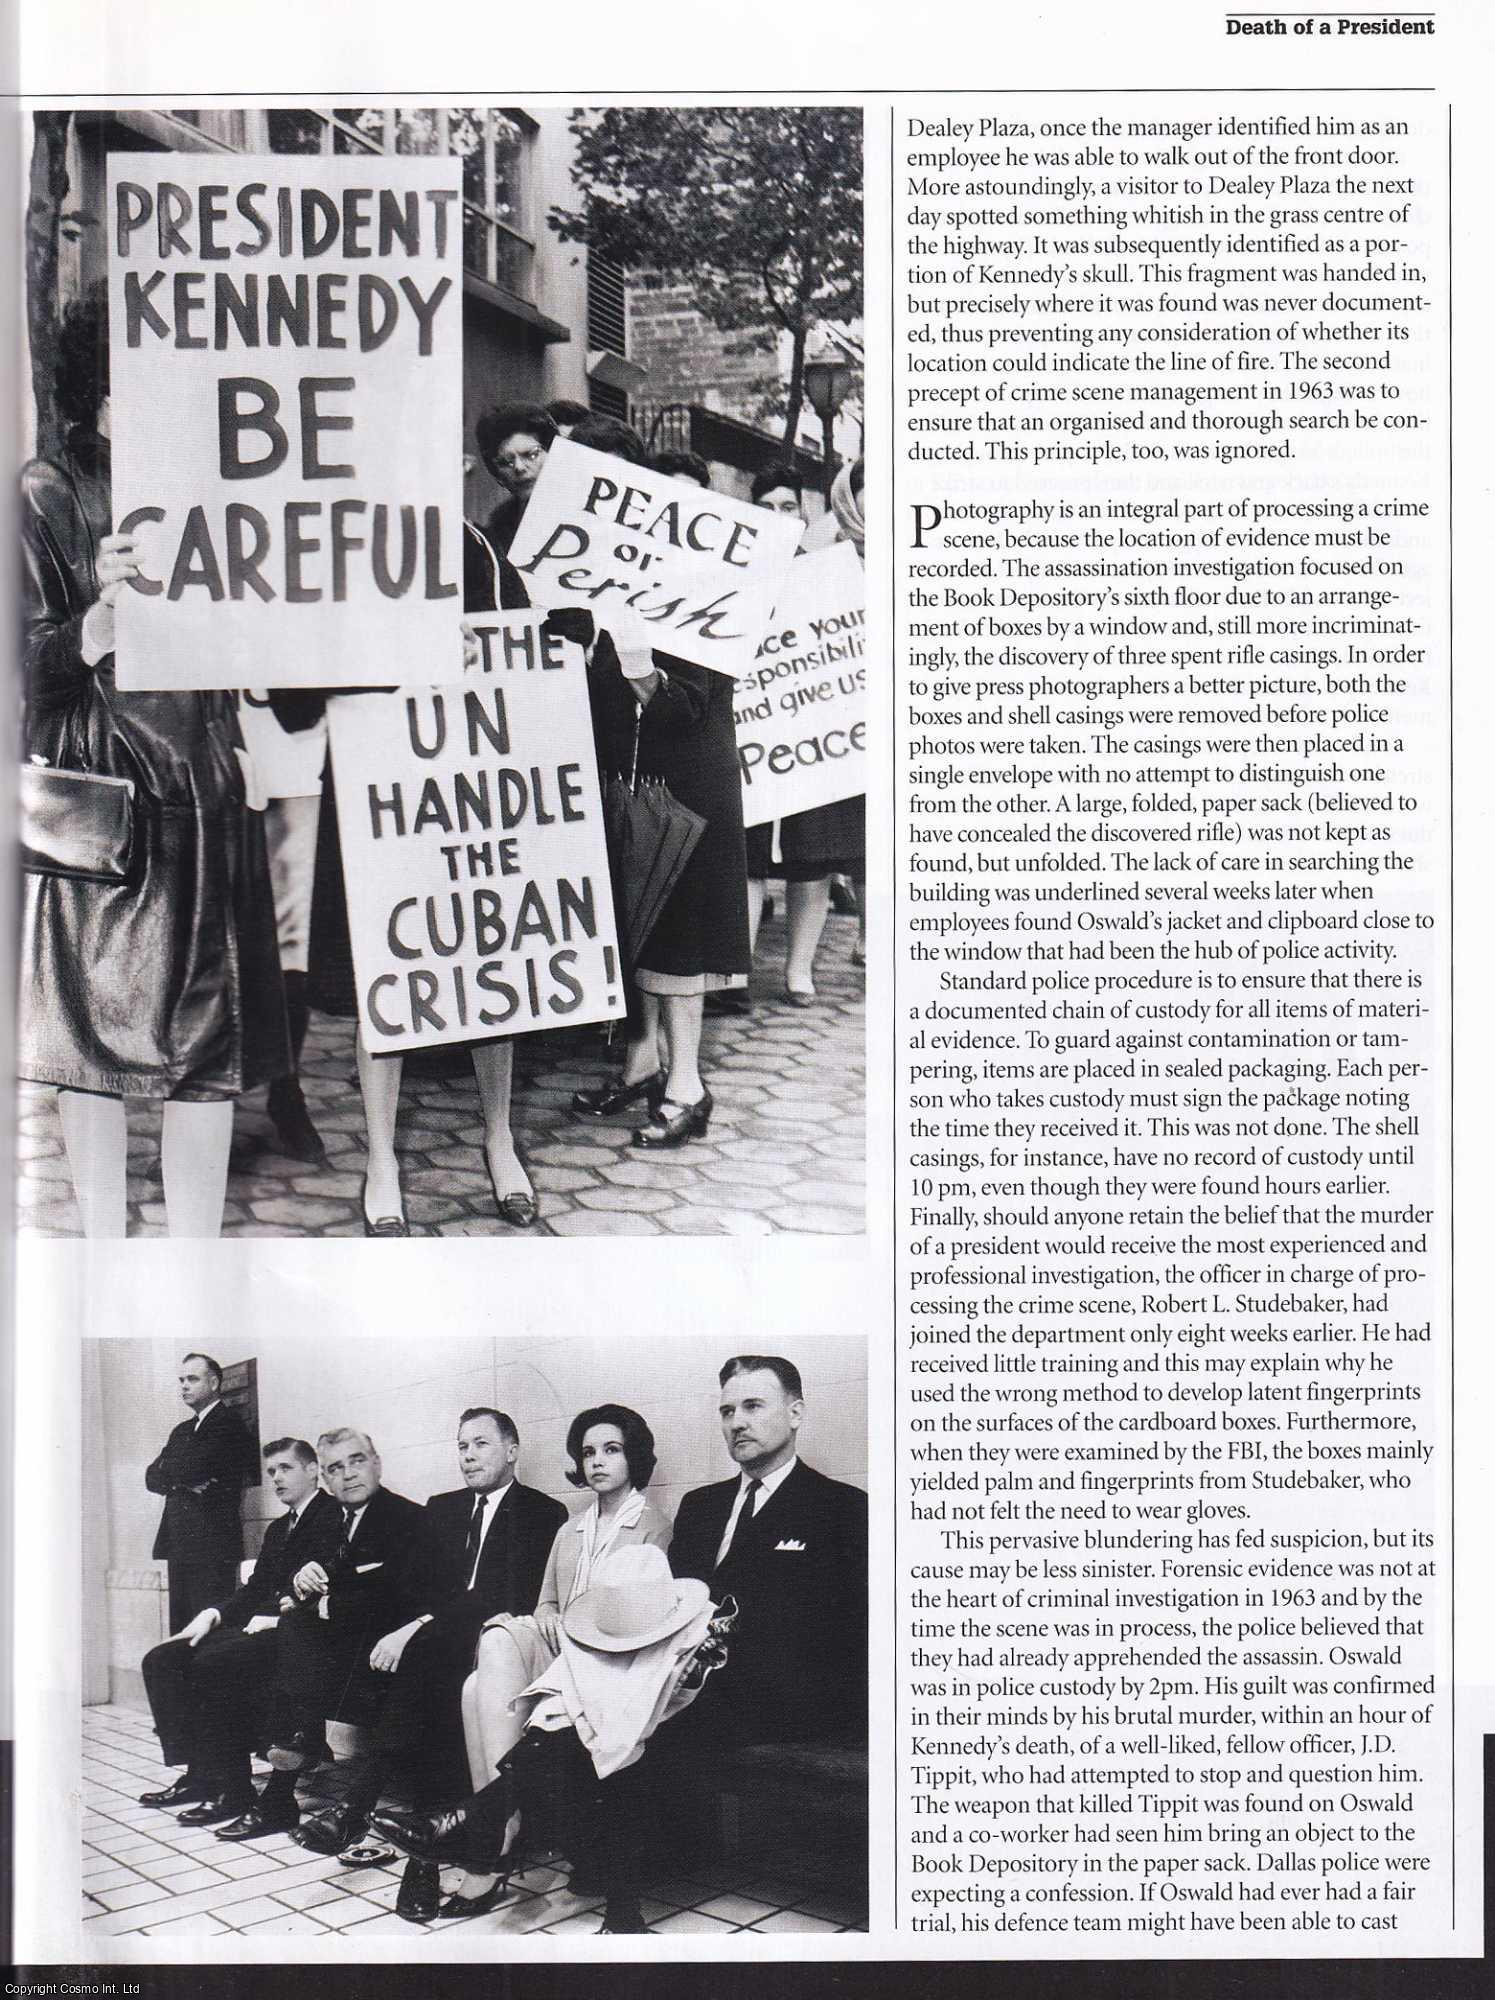 Peter Ling - Killing Kennedy: Cock-Ups and Cover-Ups in the Investigation. An original article from History Today magazine, 2013.